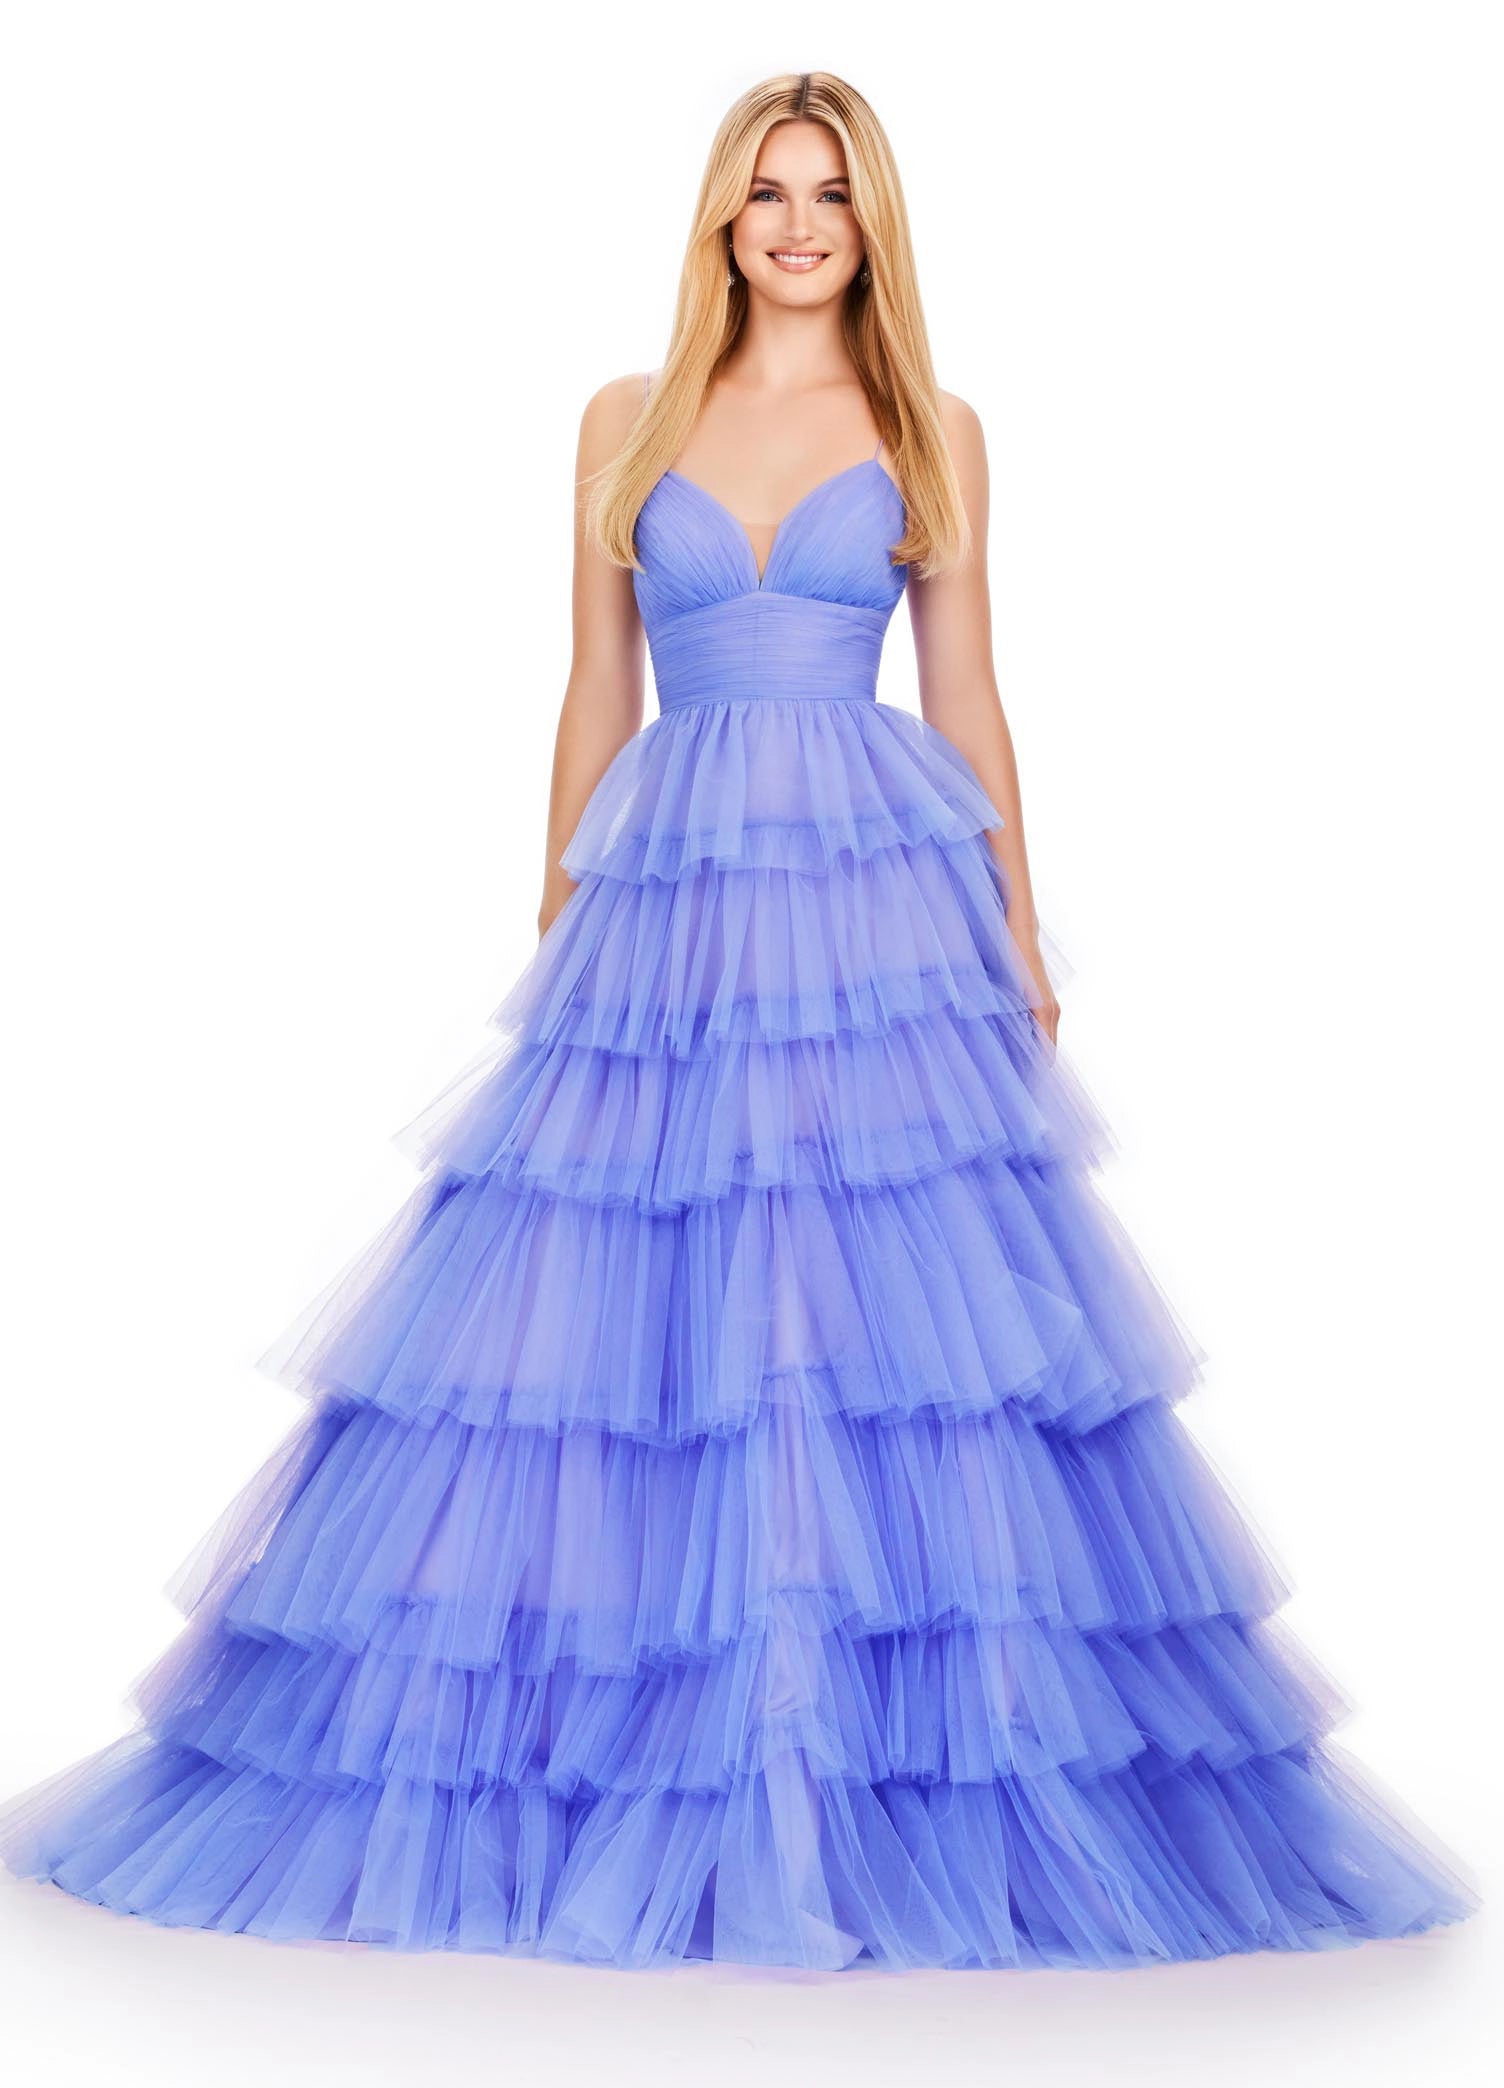 Ashley Lauren 11622 Long Layered Tulle A Line Prom Dress Formal Ballgown V Neck This tulle ball gown features a tiered design and ruched bustier. The look is complete with spaghetti straps and a sweetheart neckline.  COLORS: Electric Coral, Orchid, Jade, Hot Pink Sizes: 0-24